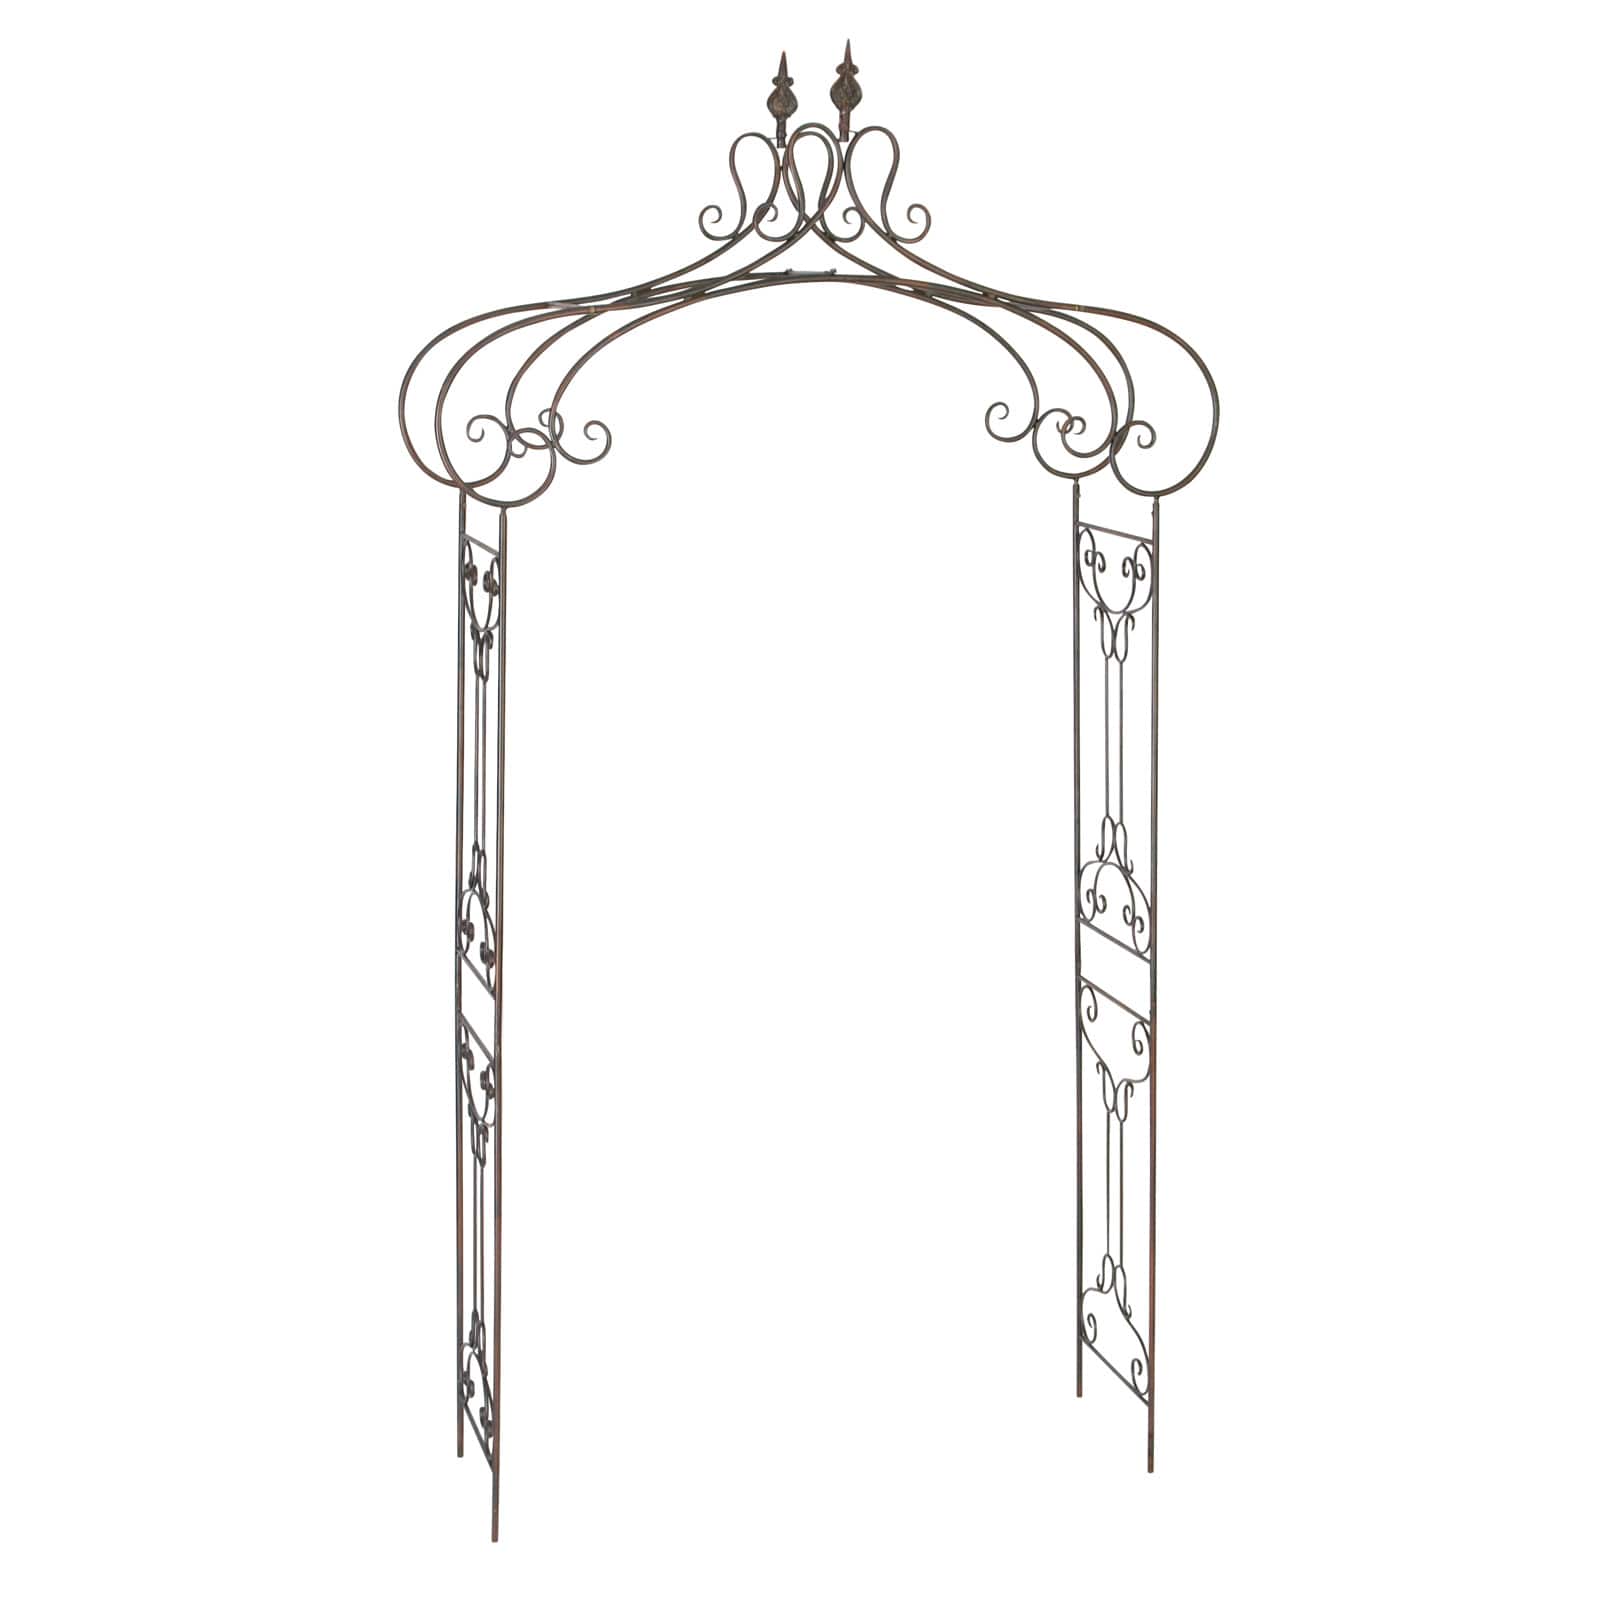 8ft. Black Iron Traditional Garden Archway Arbor